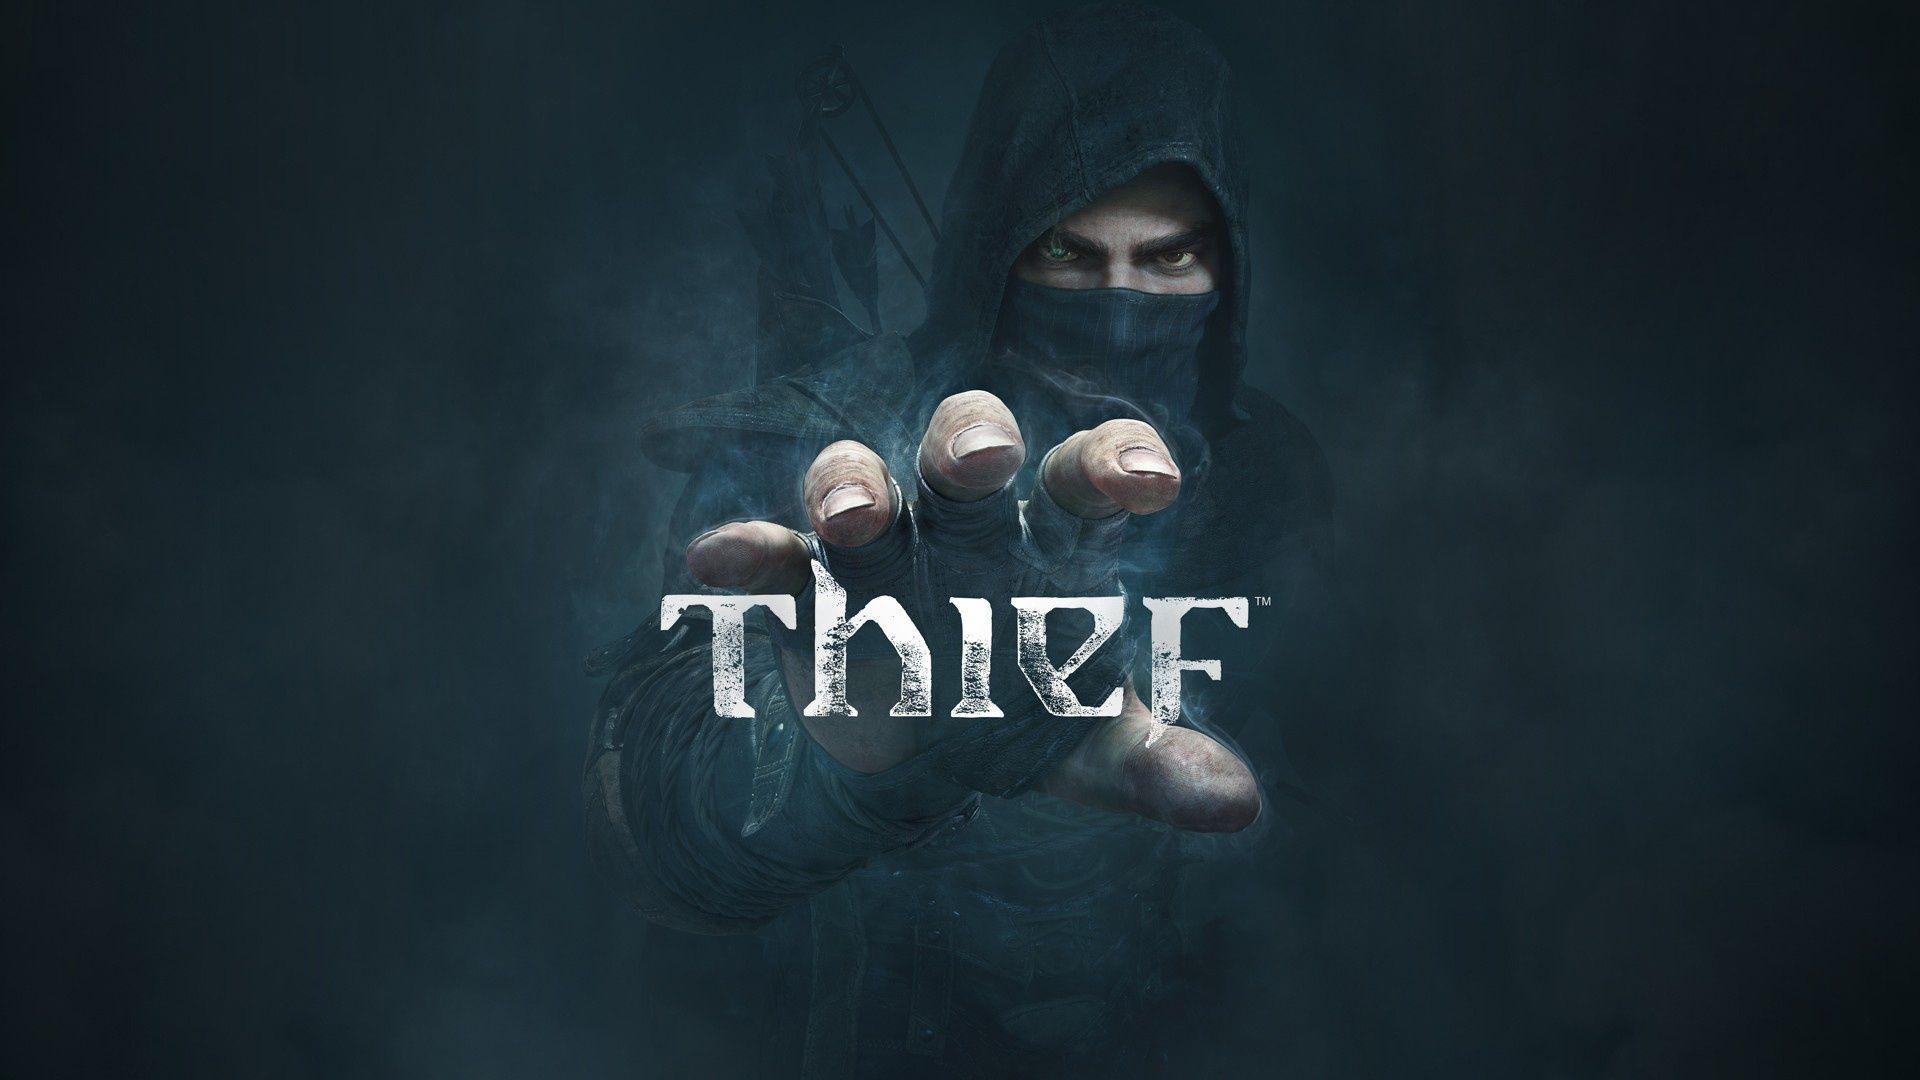 Thief Game Wallpaper in jpg format for free download